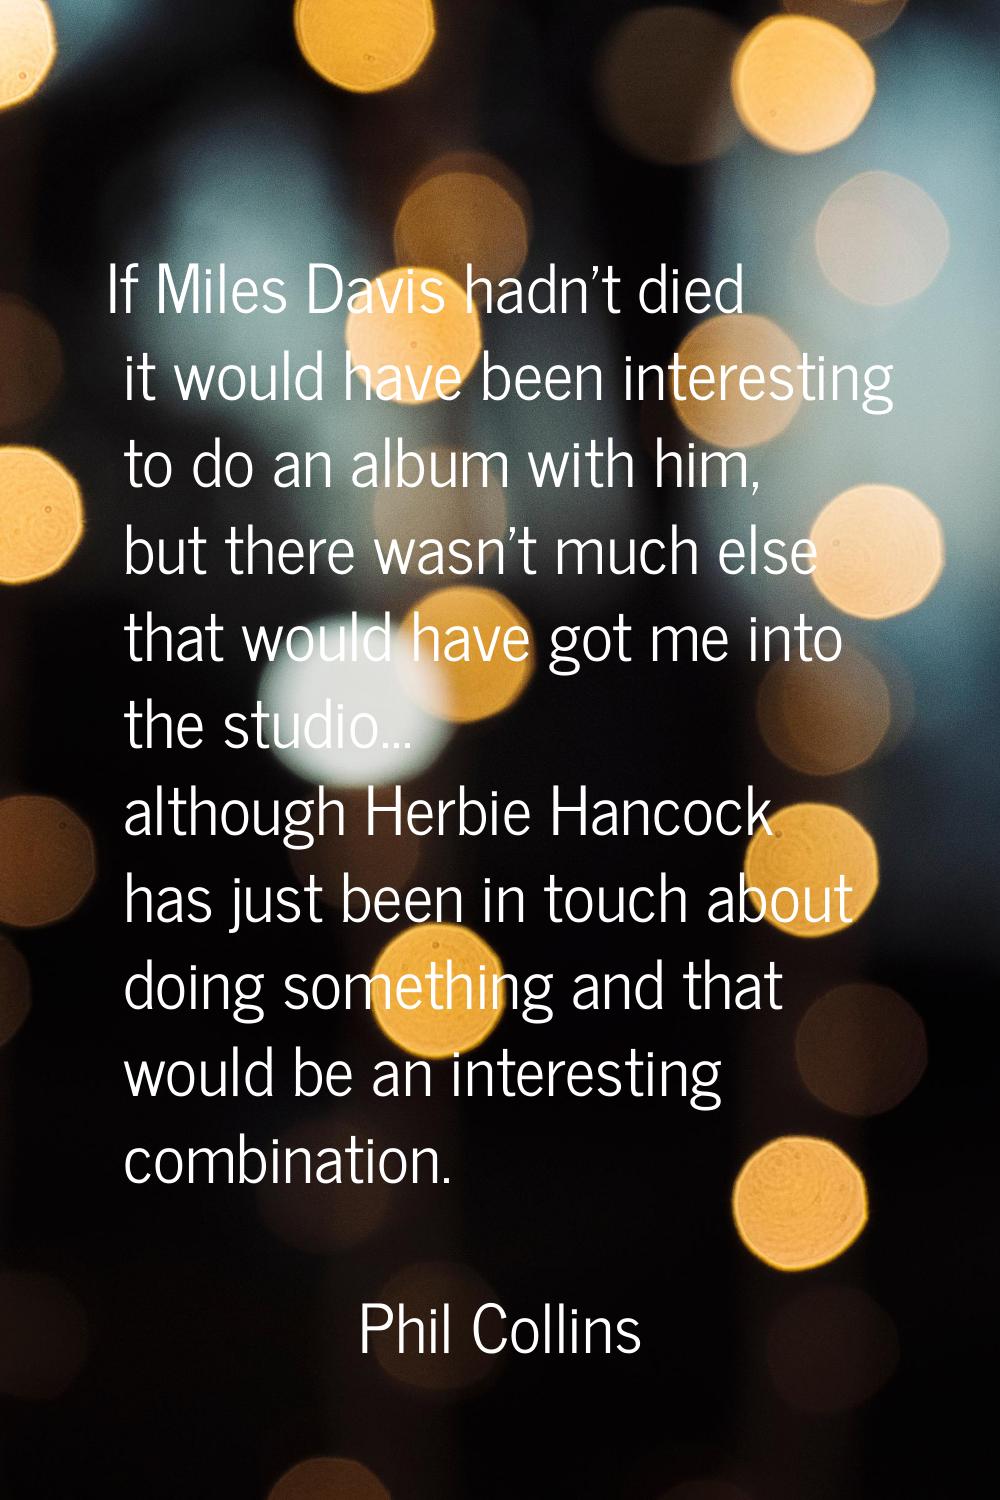 If Miles Davis hadn't died it would have been interesting to do an album with him, but there wasn't